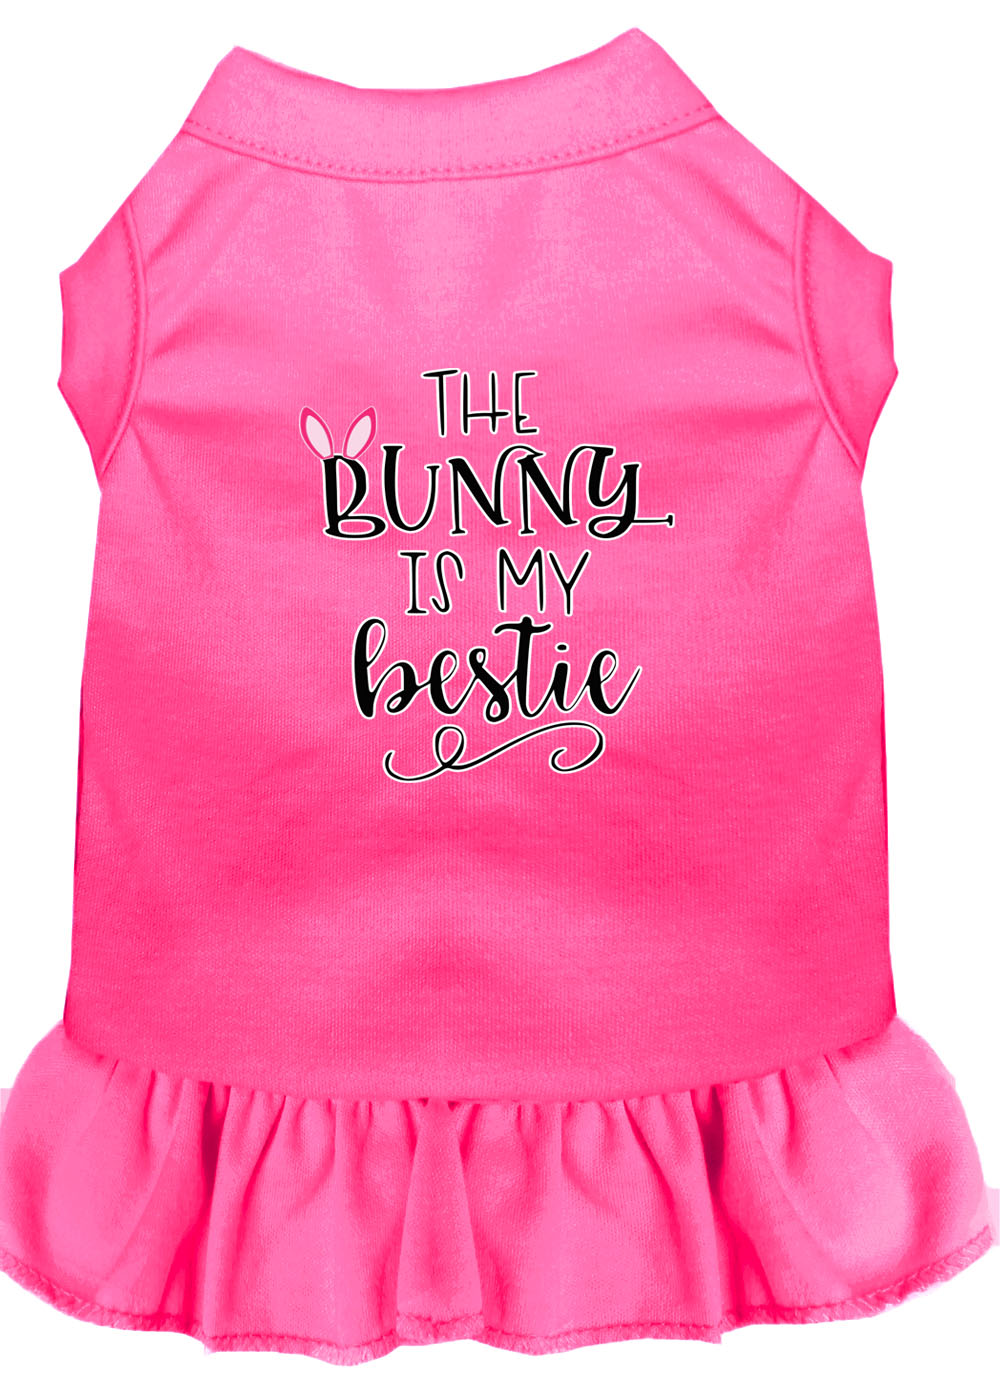 Bunny is my Bestie Screen Print Dog Dress Bright Pink Med